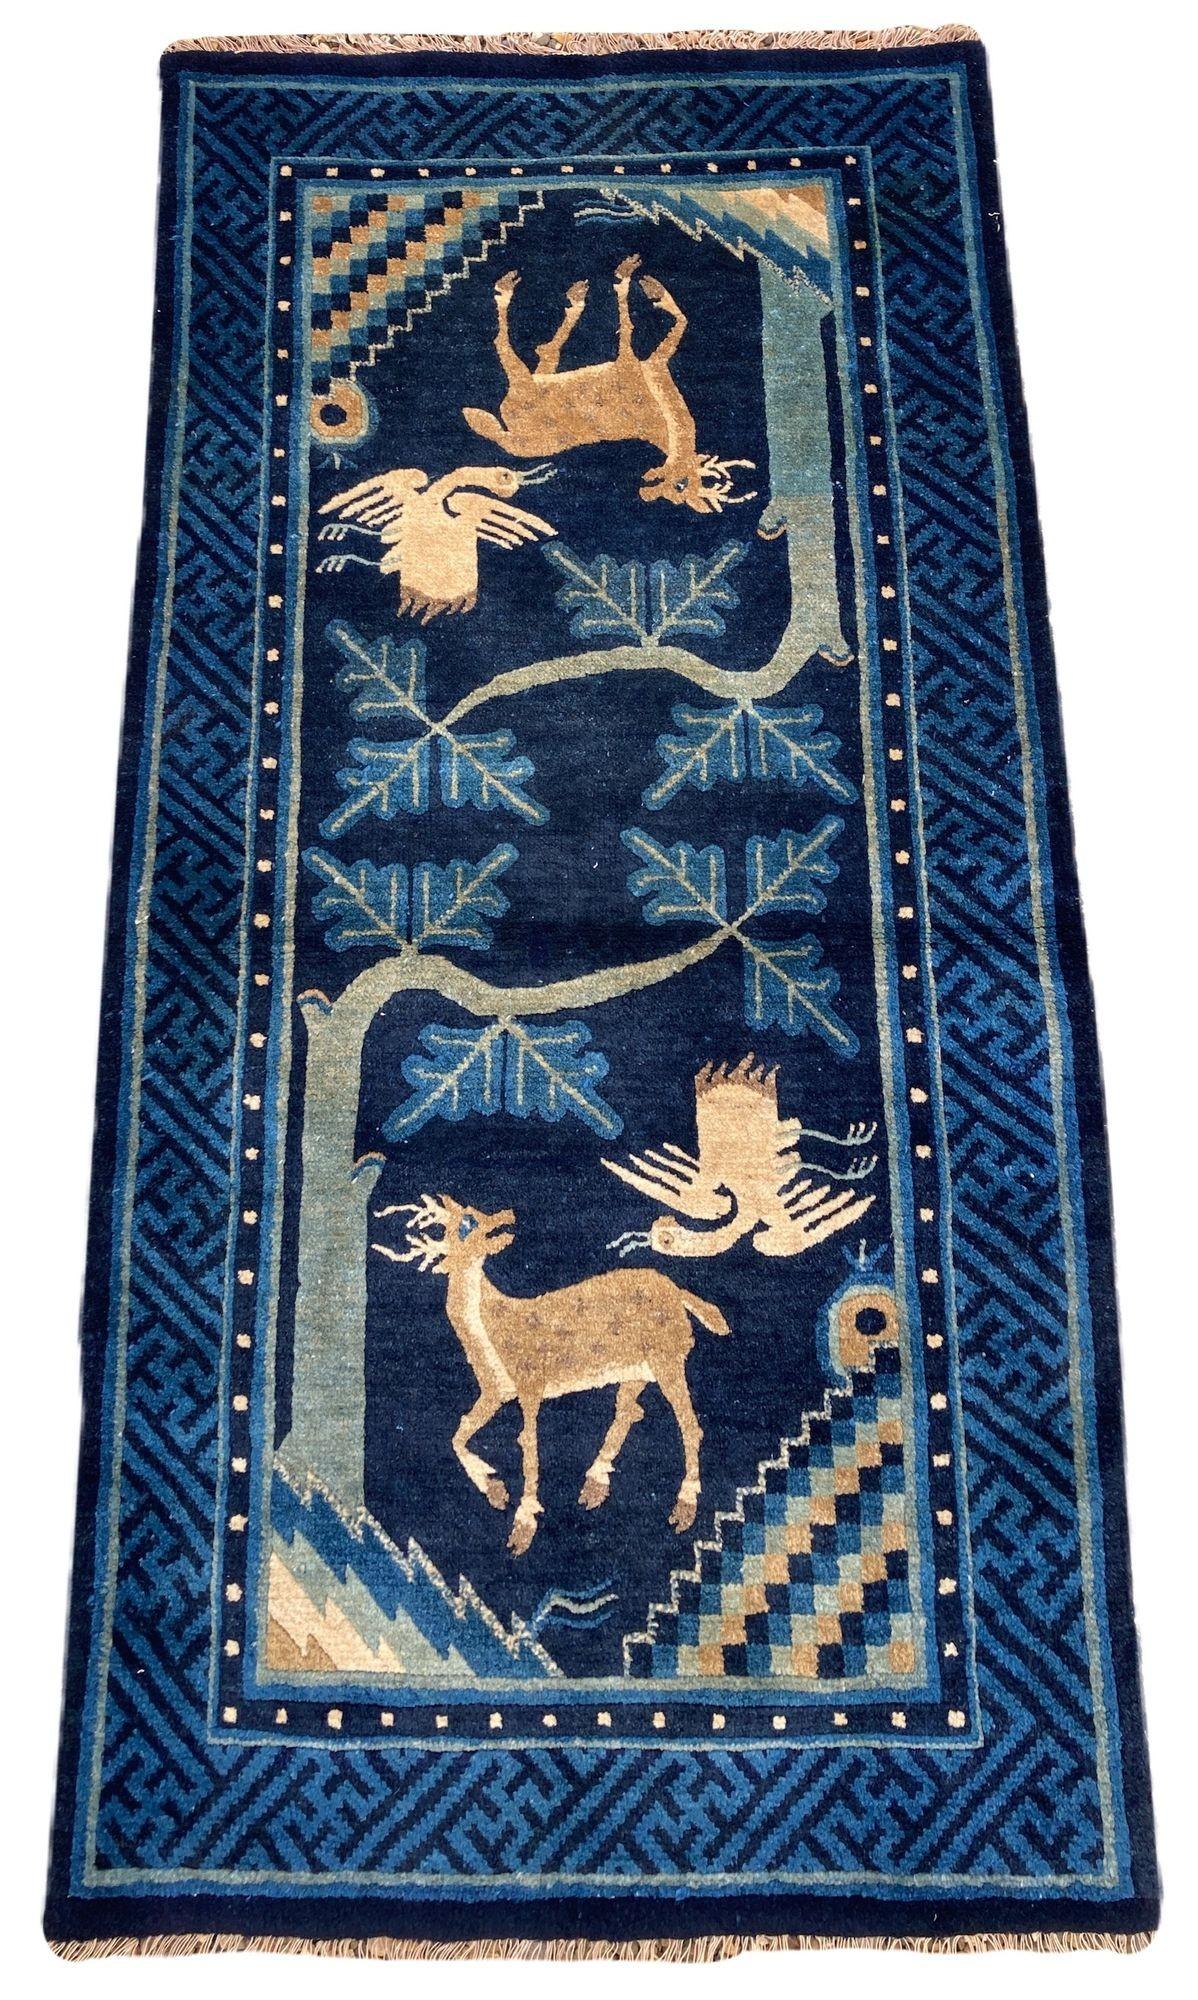 A lovely vintage Pao-Tao rug, handwoven in China circa 1940 with the traditional design of the deer and the crane on a deep indigo field and key border.
Size: 1.32m x 0.71m (4ft 4in x 2ft 4in)
This rug is in good condition with light age related